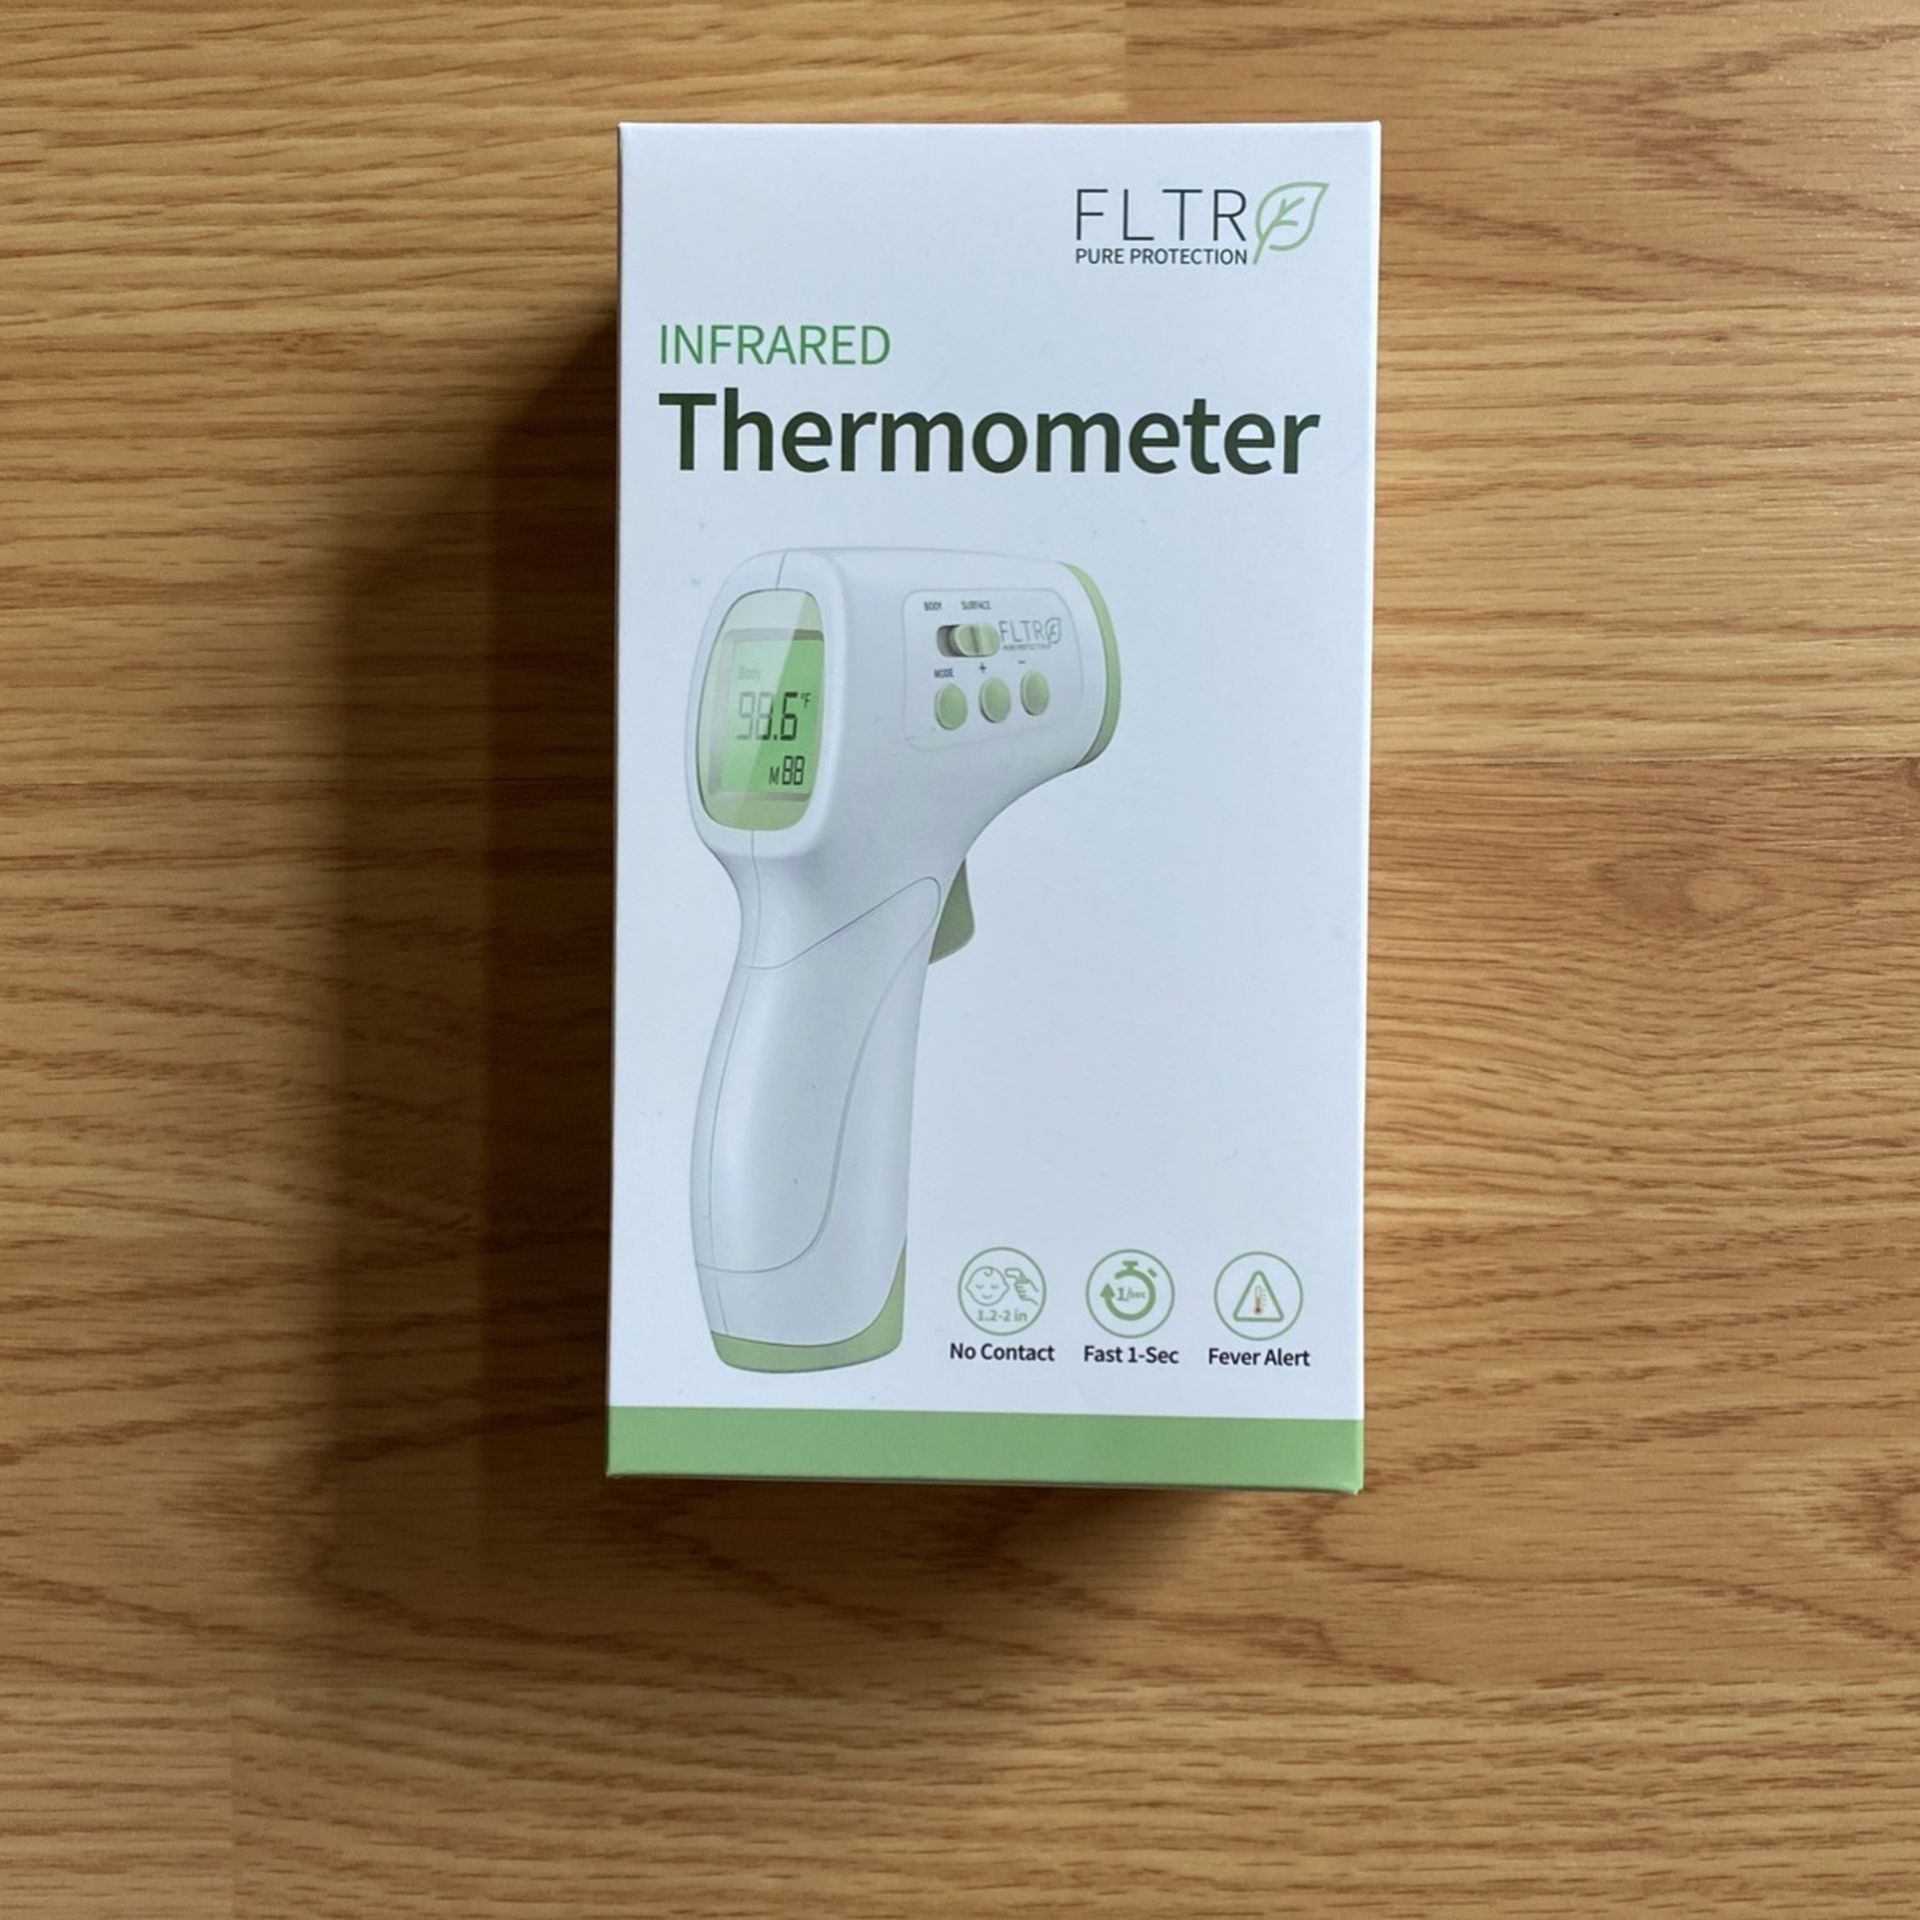 FLTR Infrared Thermometer